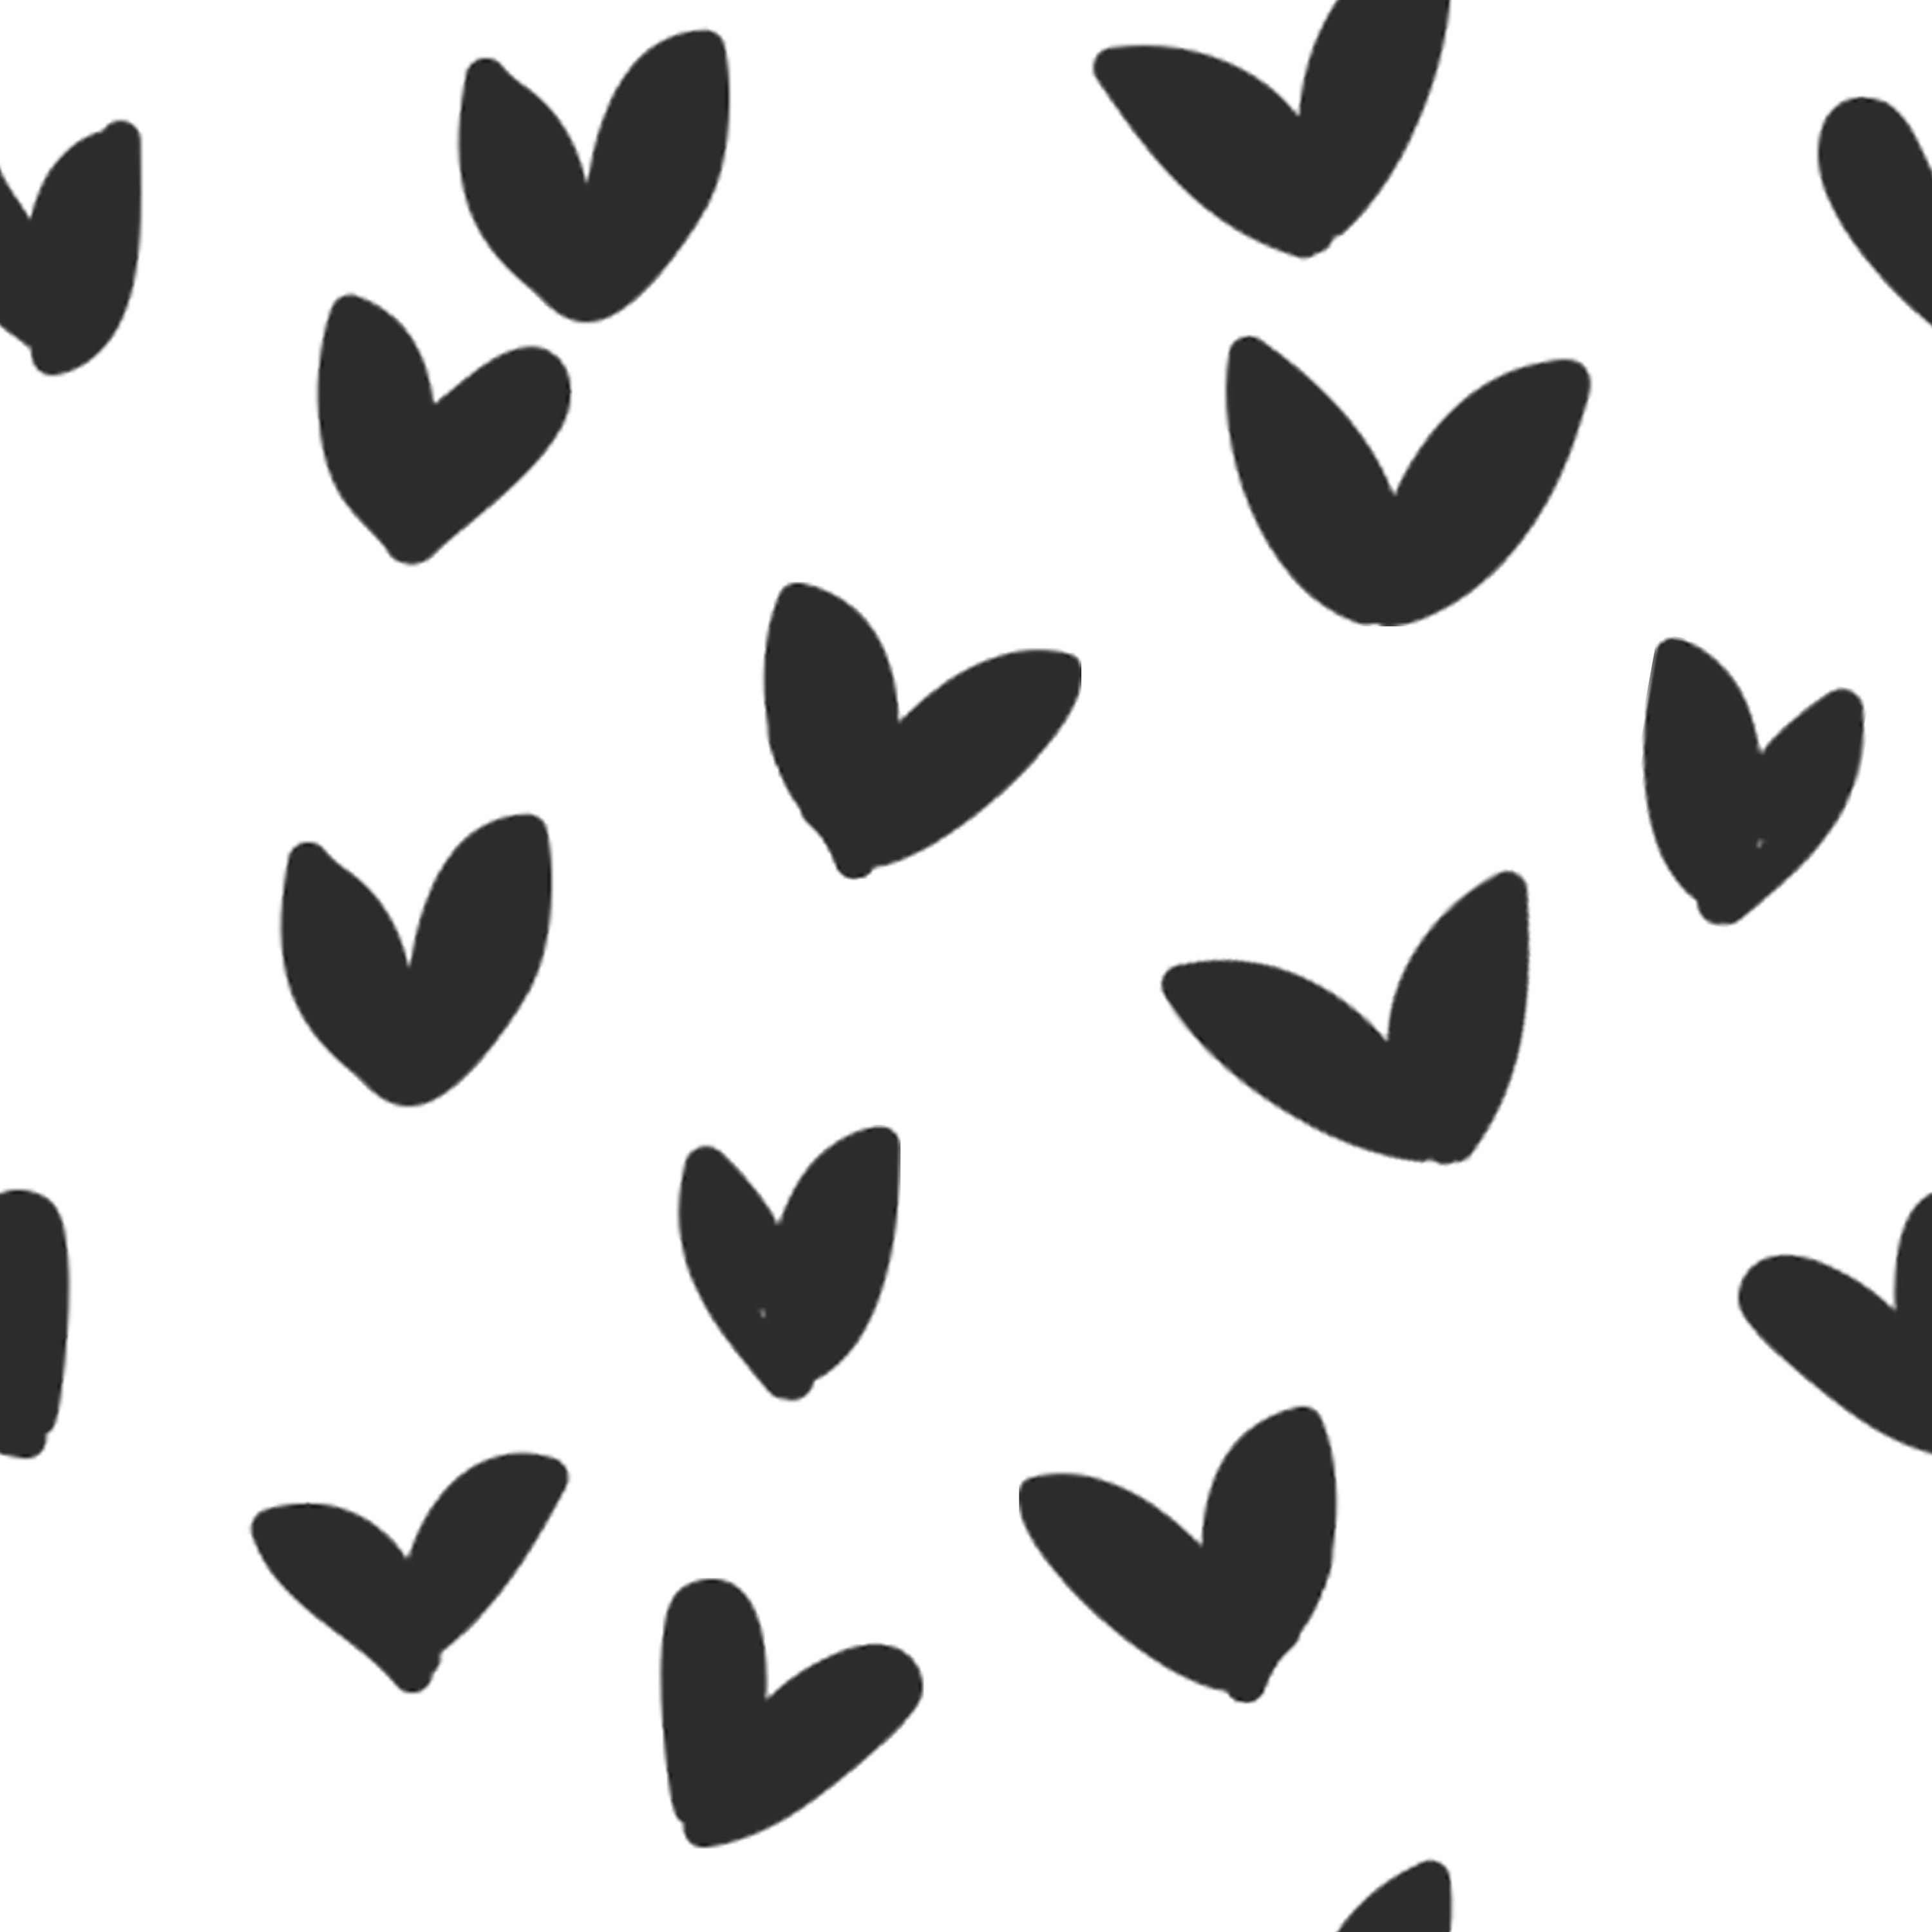 A black and white image of a pattern of black hearts - Black heart